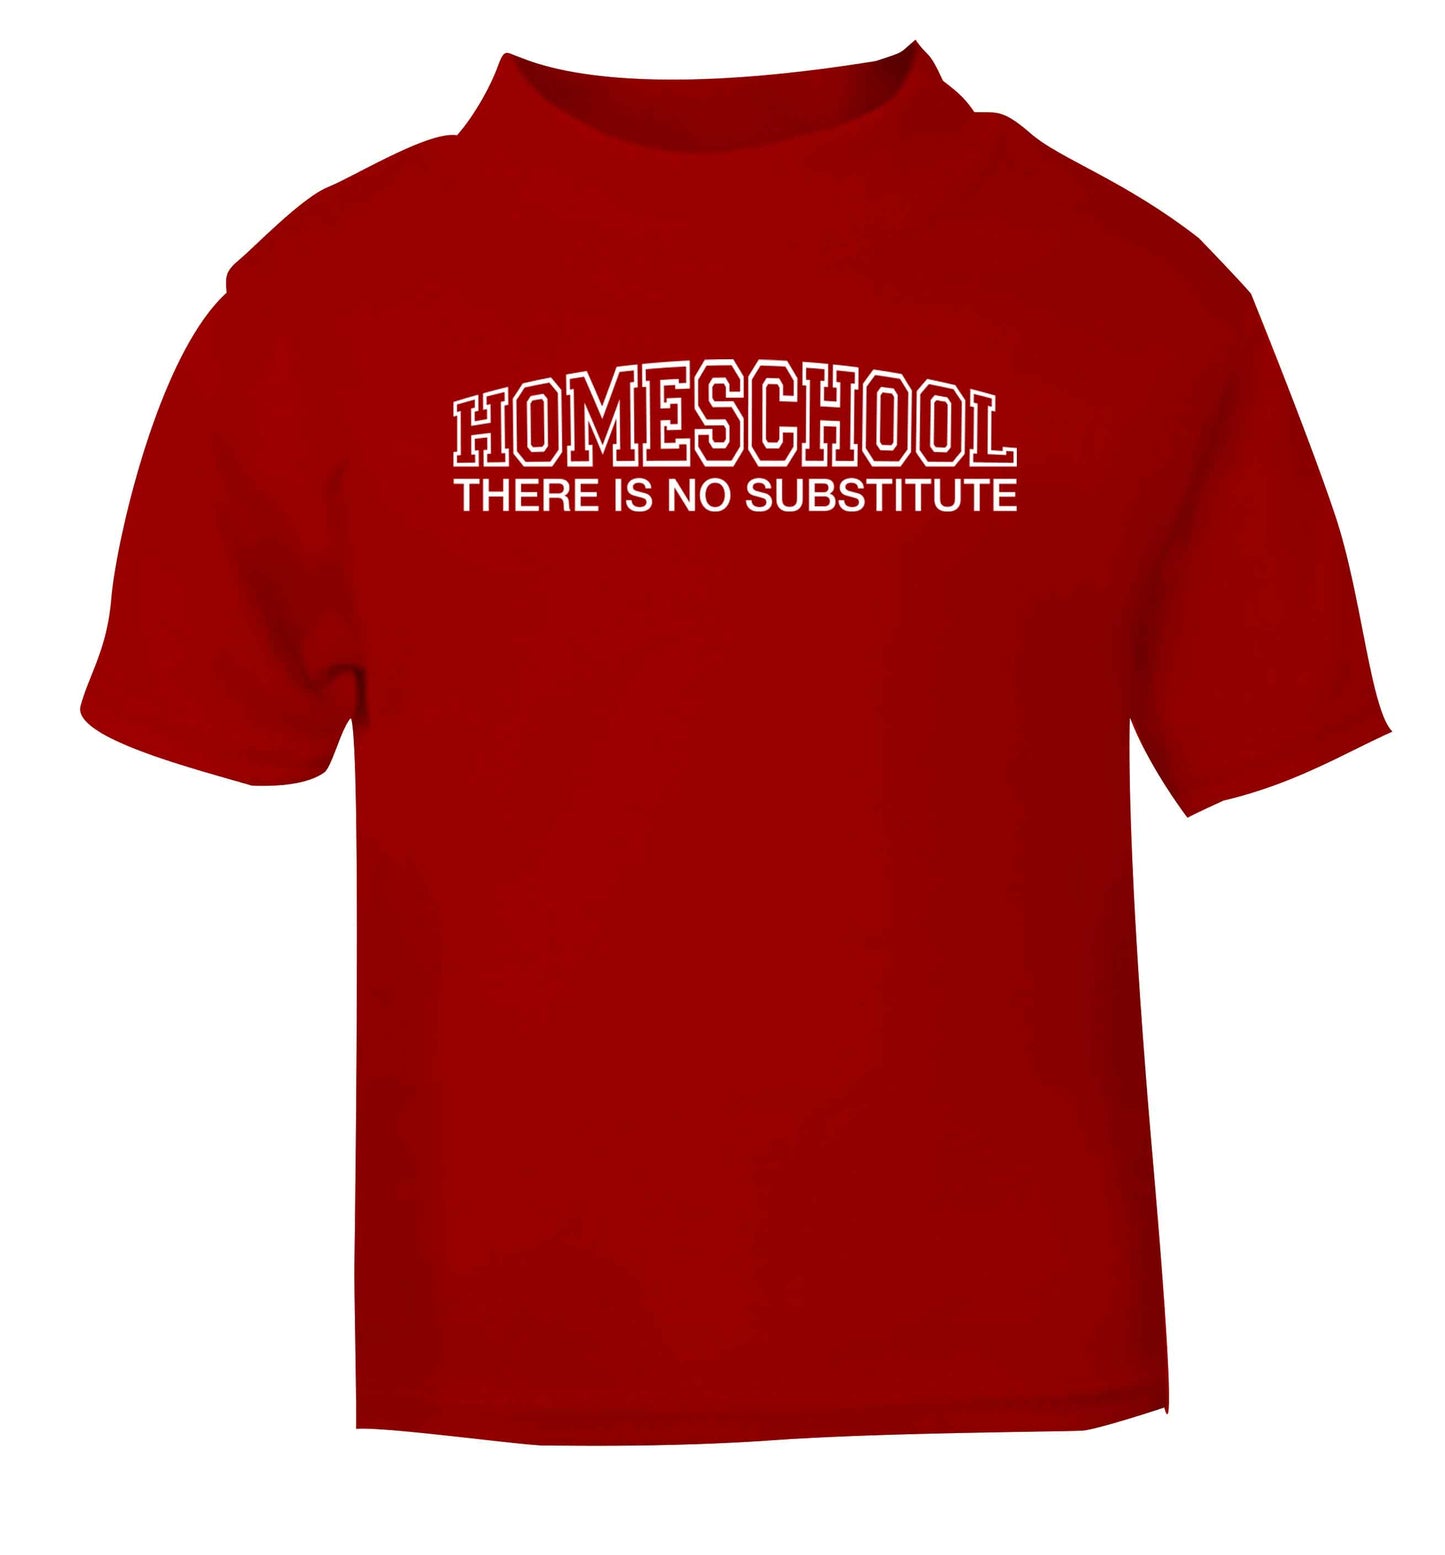 Homeschool there is not substitute red Baby Toddler Tshirt 2 Years